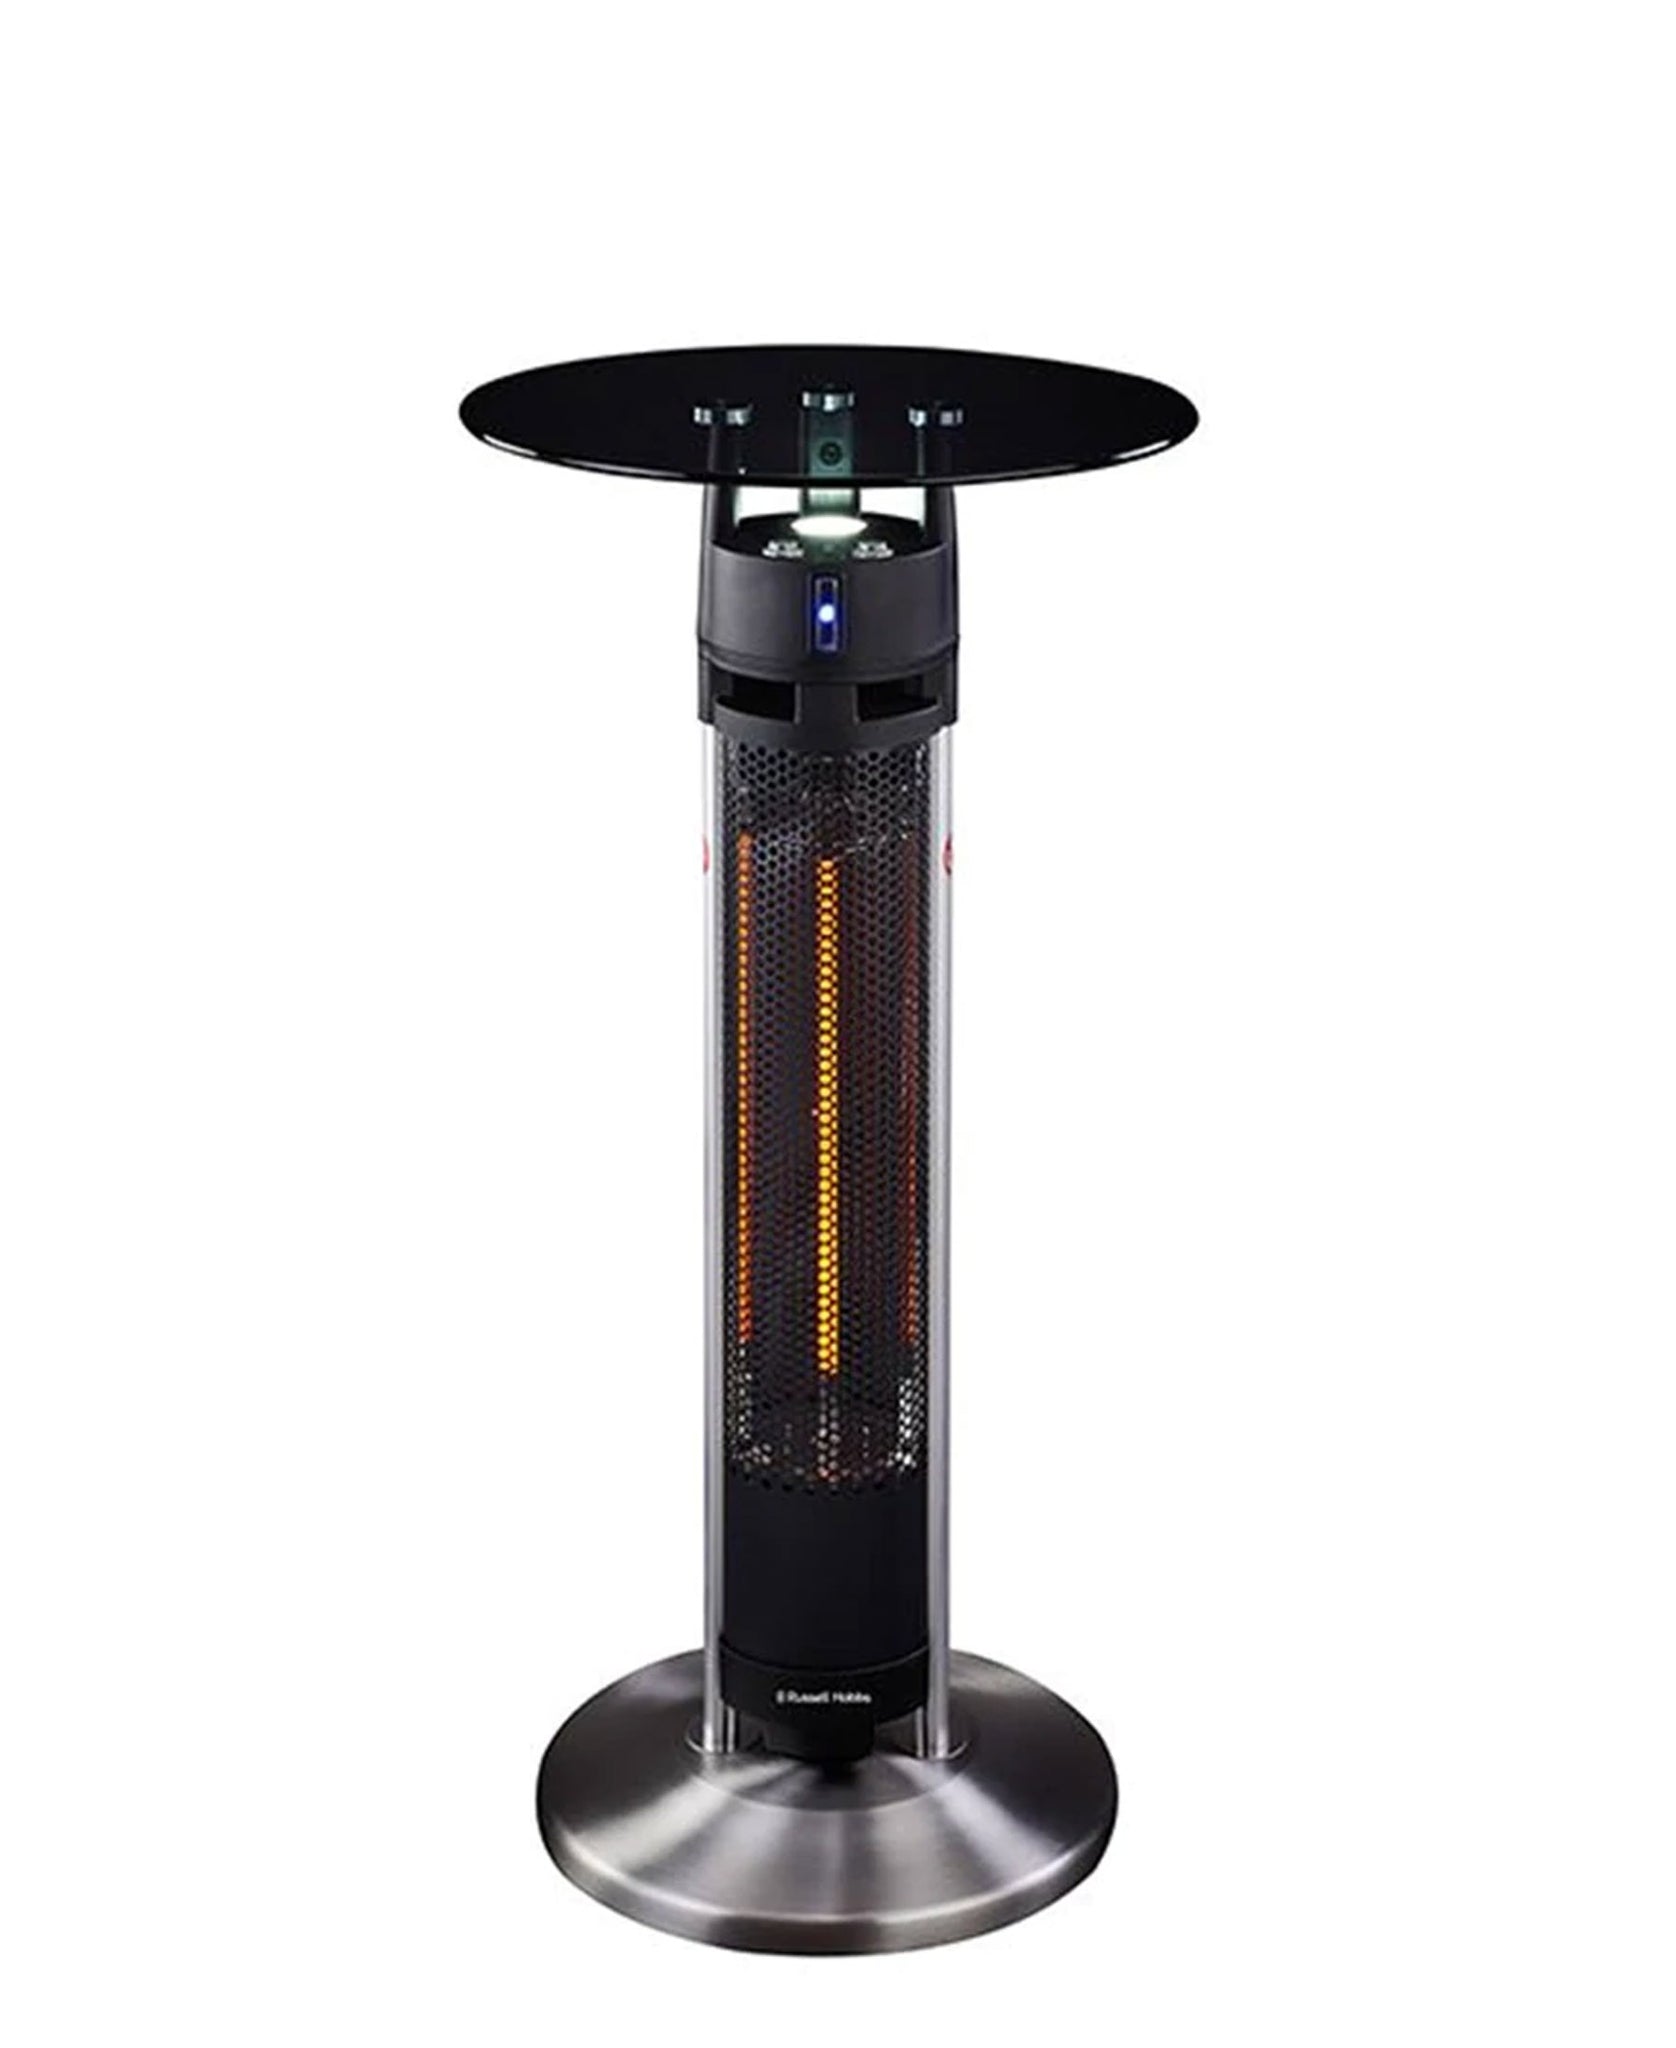 Russell Hobbs Table Heater With Sensor - Black